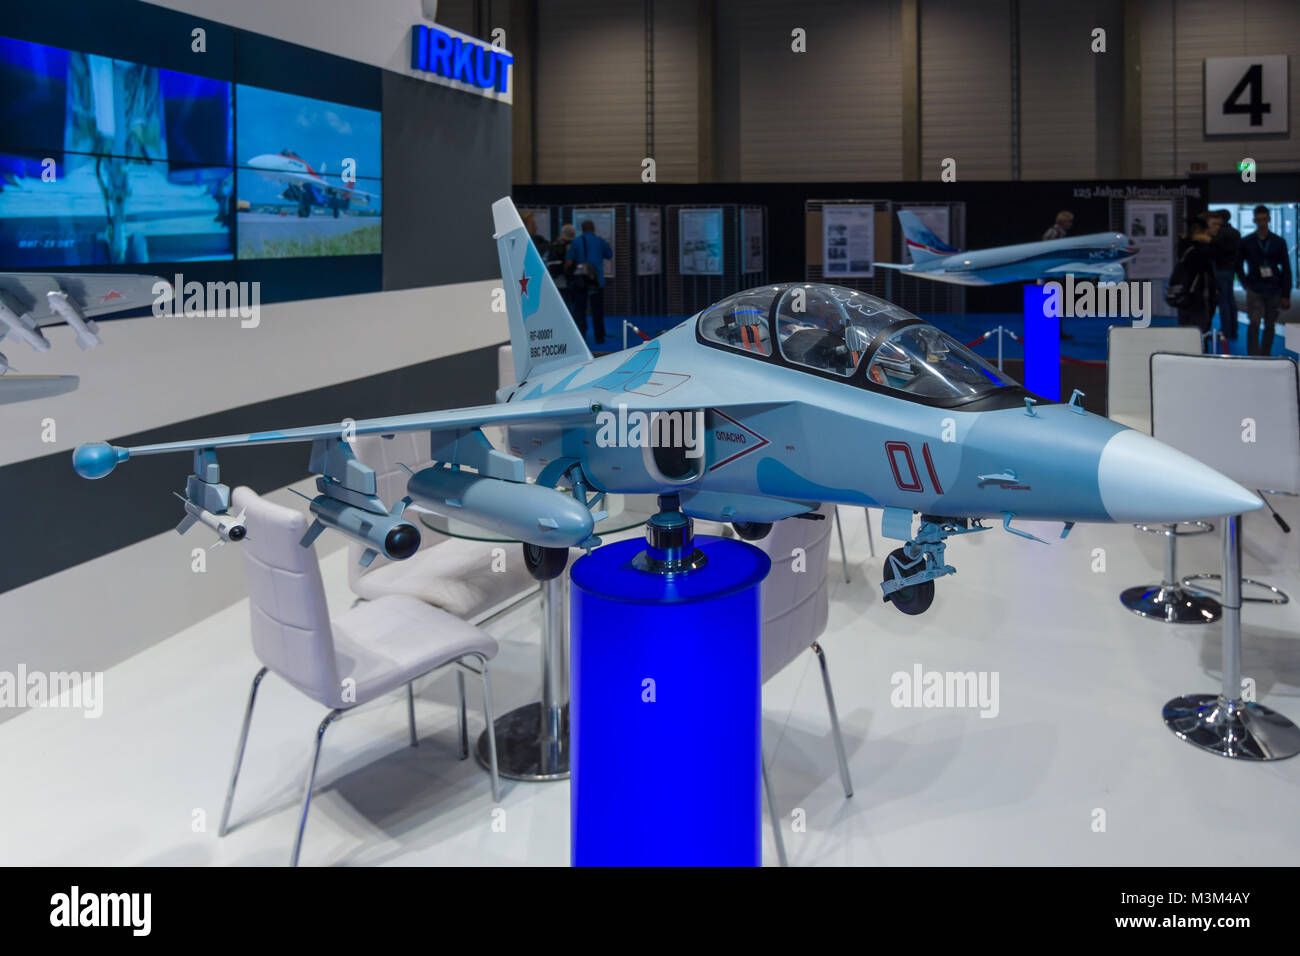 BERLIN, GERMANY - JUNE 01, 2016: The stand of Unated Aircraft Corporation (Russia). Model of Russian subsonic two-seat advanced jet trainer Yakovlev Yak-130. Exhibition ILA Berlin Air Show 2016 Stock Photo